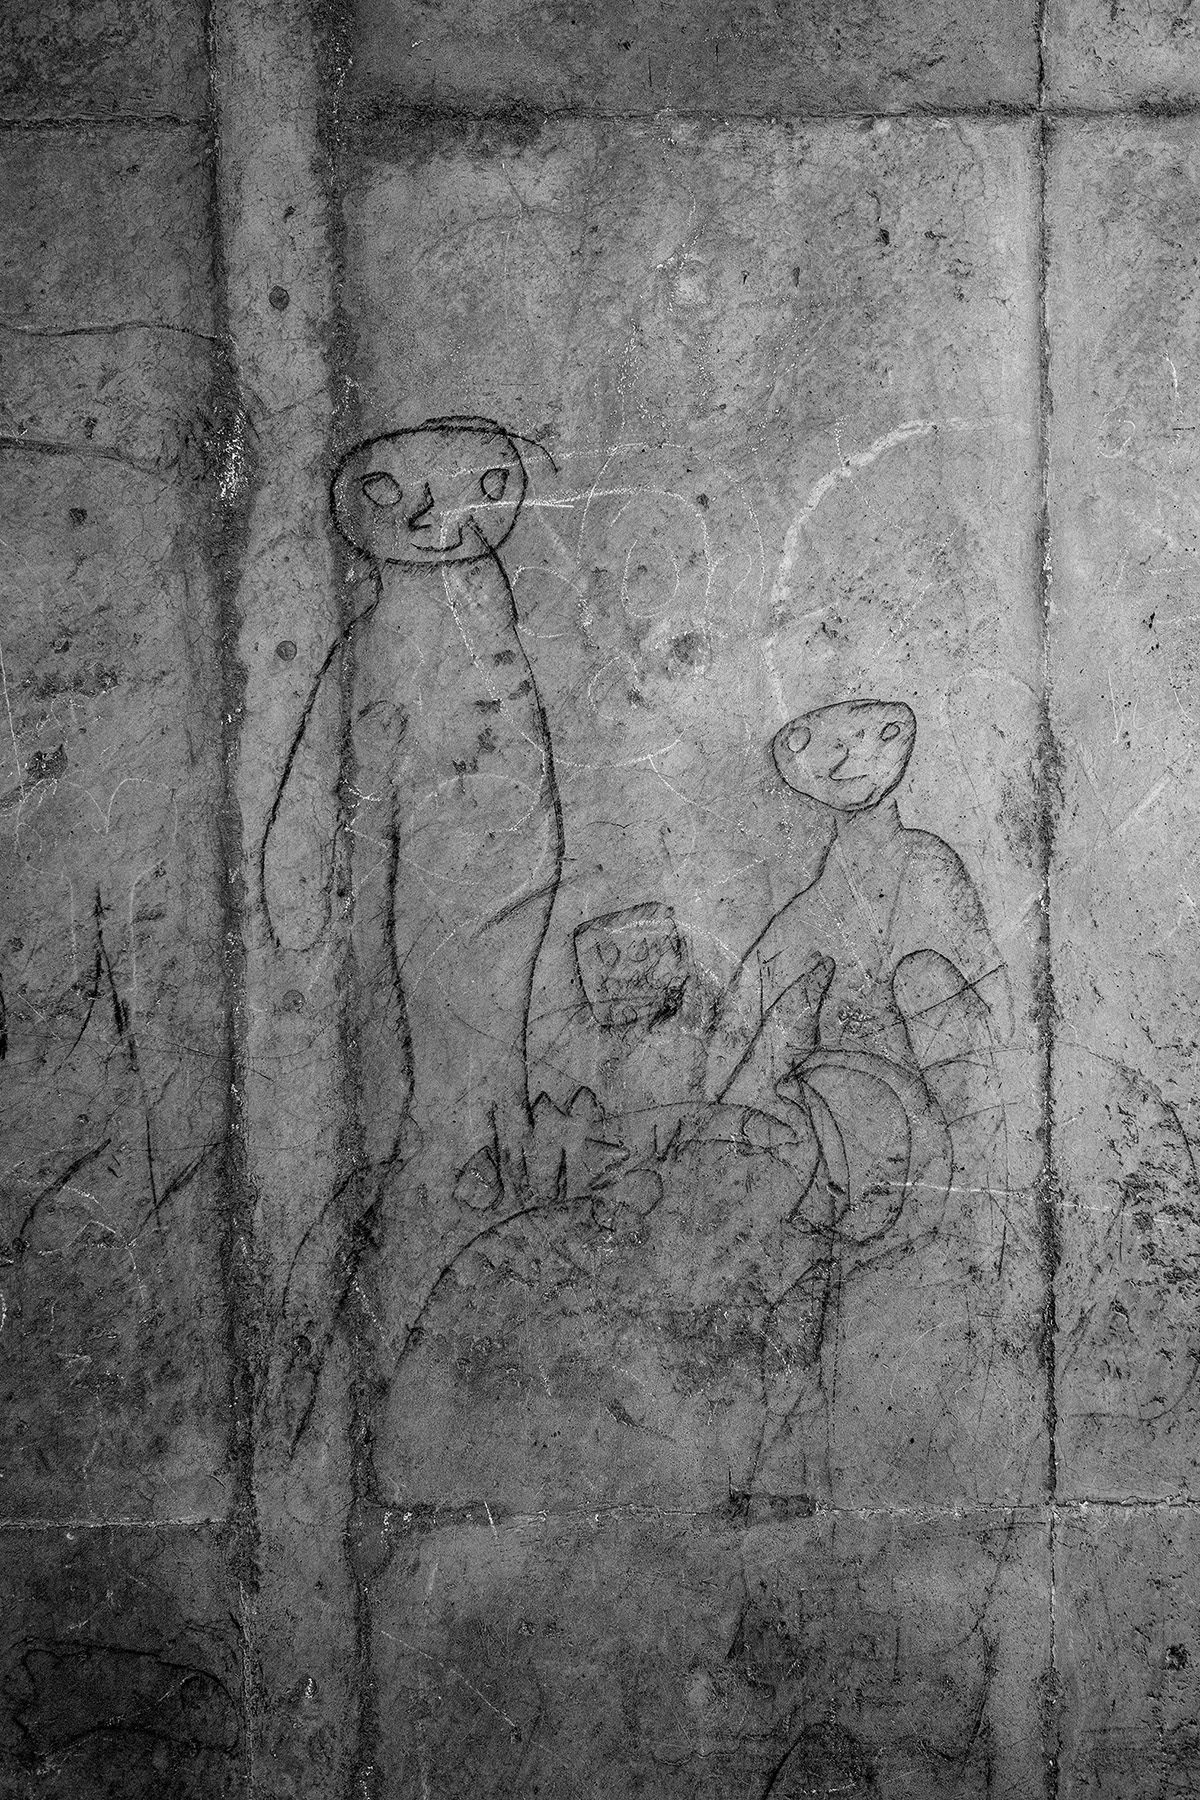 Black and white photo of line drawings of human figures etched on a wall